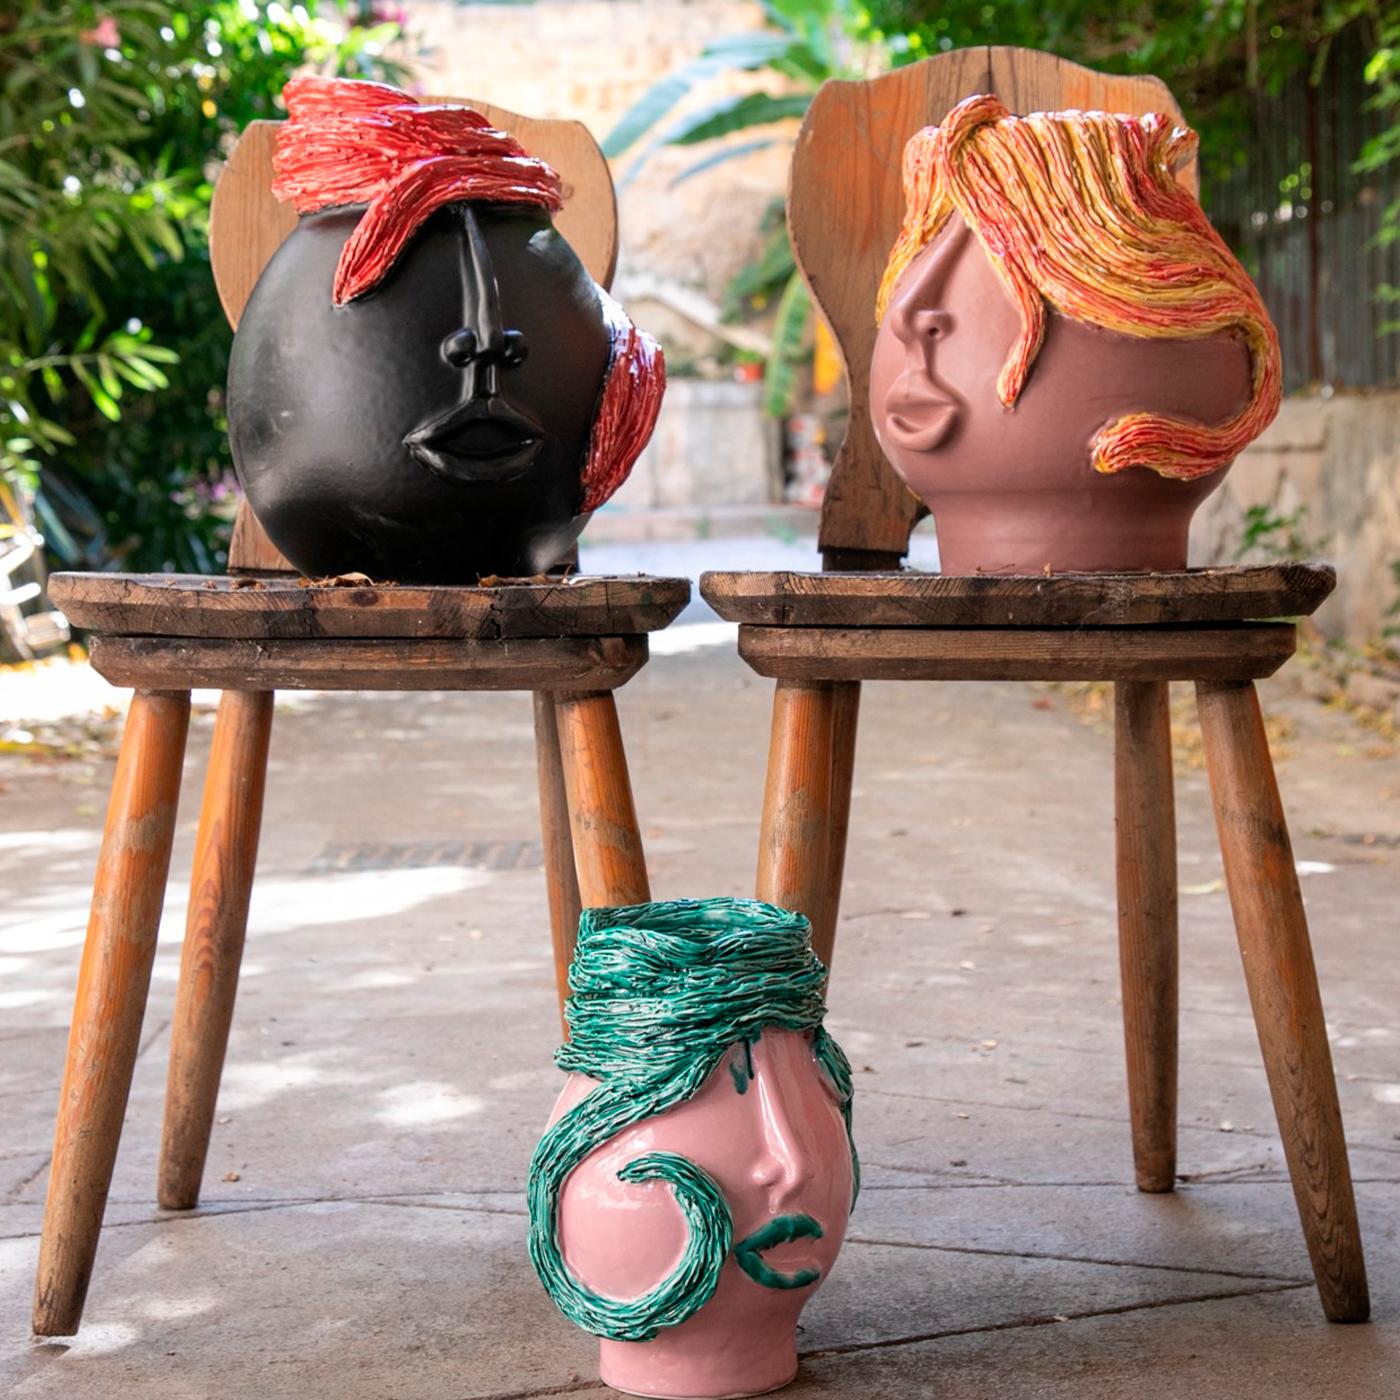 A splendid contemporary take on traditional Moor's heads, this superb sculpture by Patrizia Italianocan be used as a decorative objet d'art as well as a flower vase for it can harmlessly contain water. Deftly handcrafted of ceramic, enhanced with a